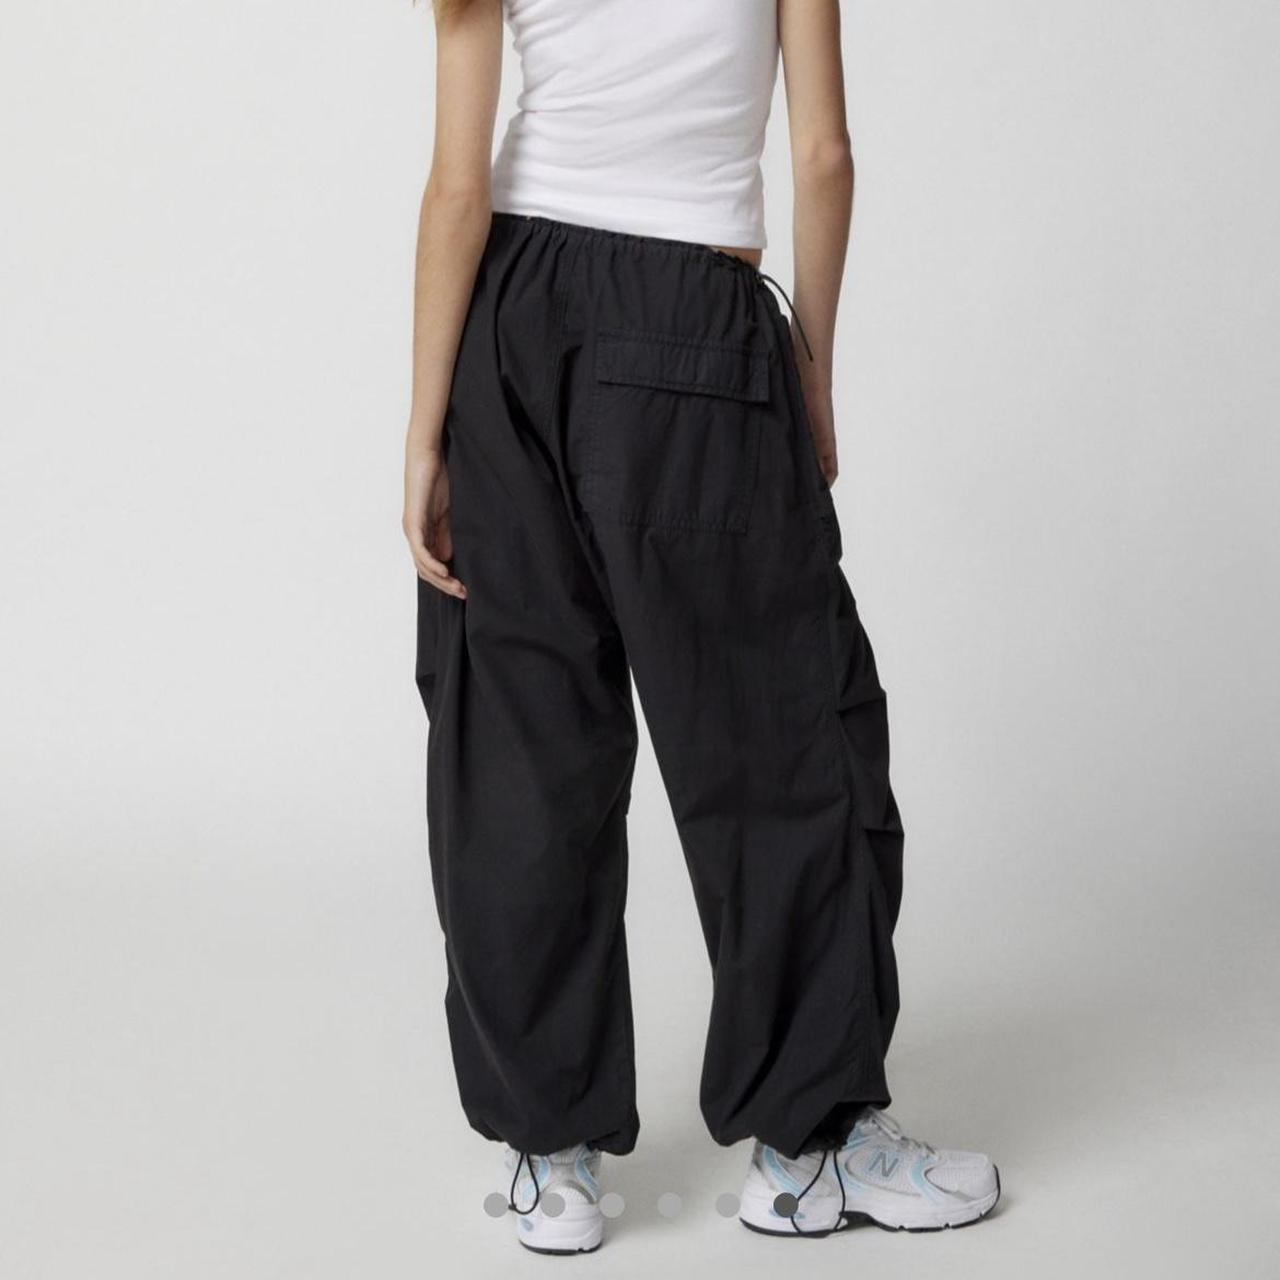 Iets frans balloon cargo pant from urban outfitters